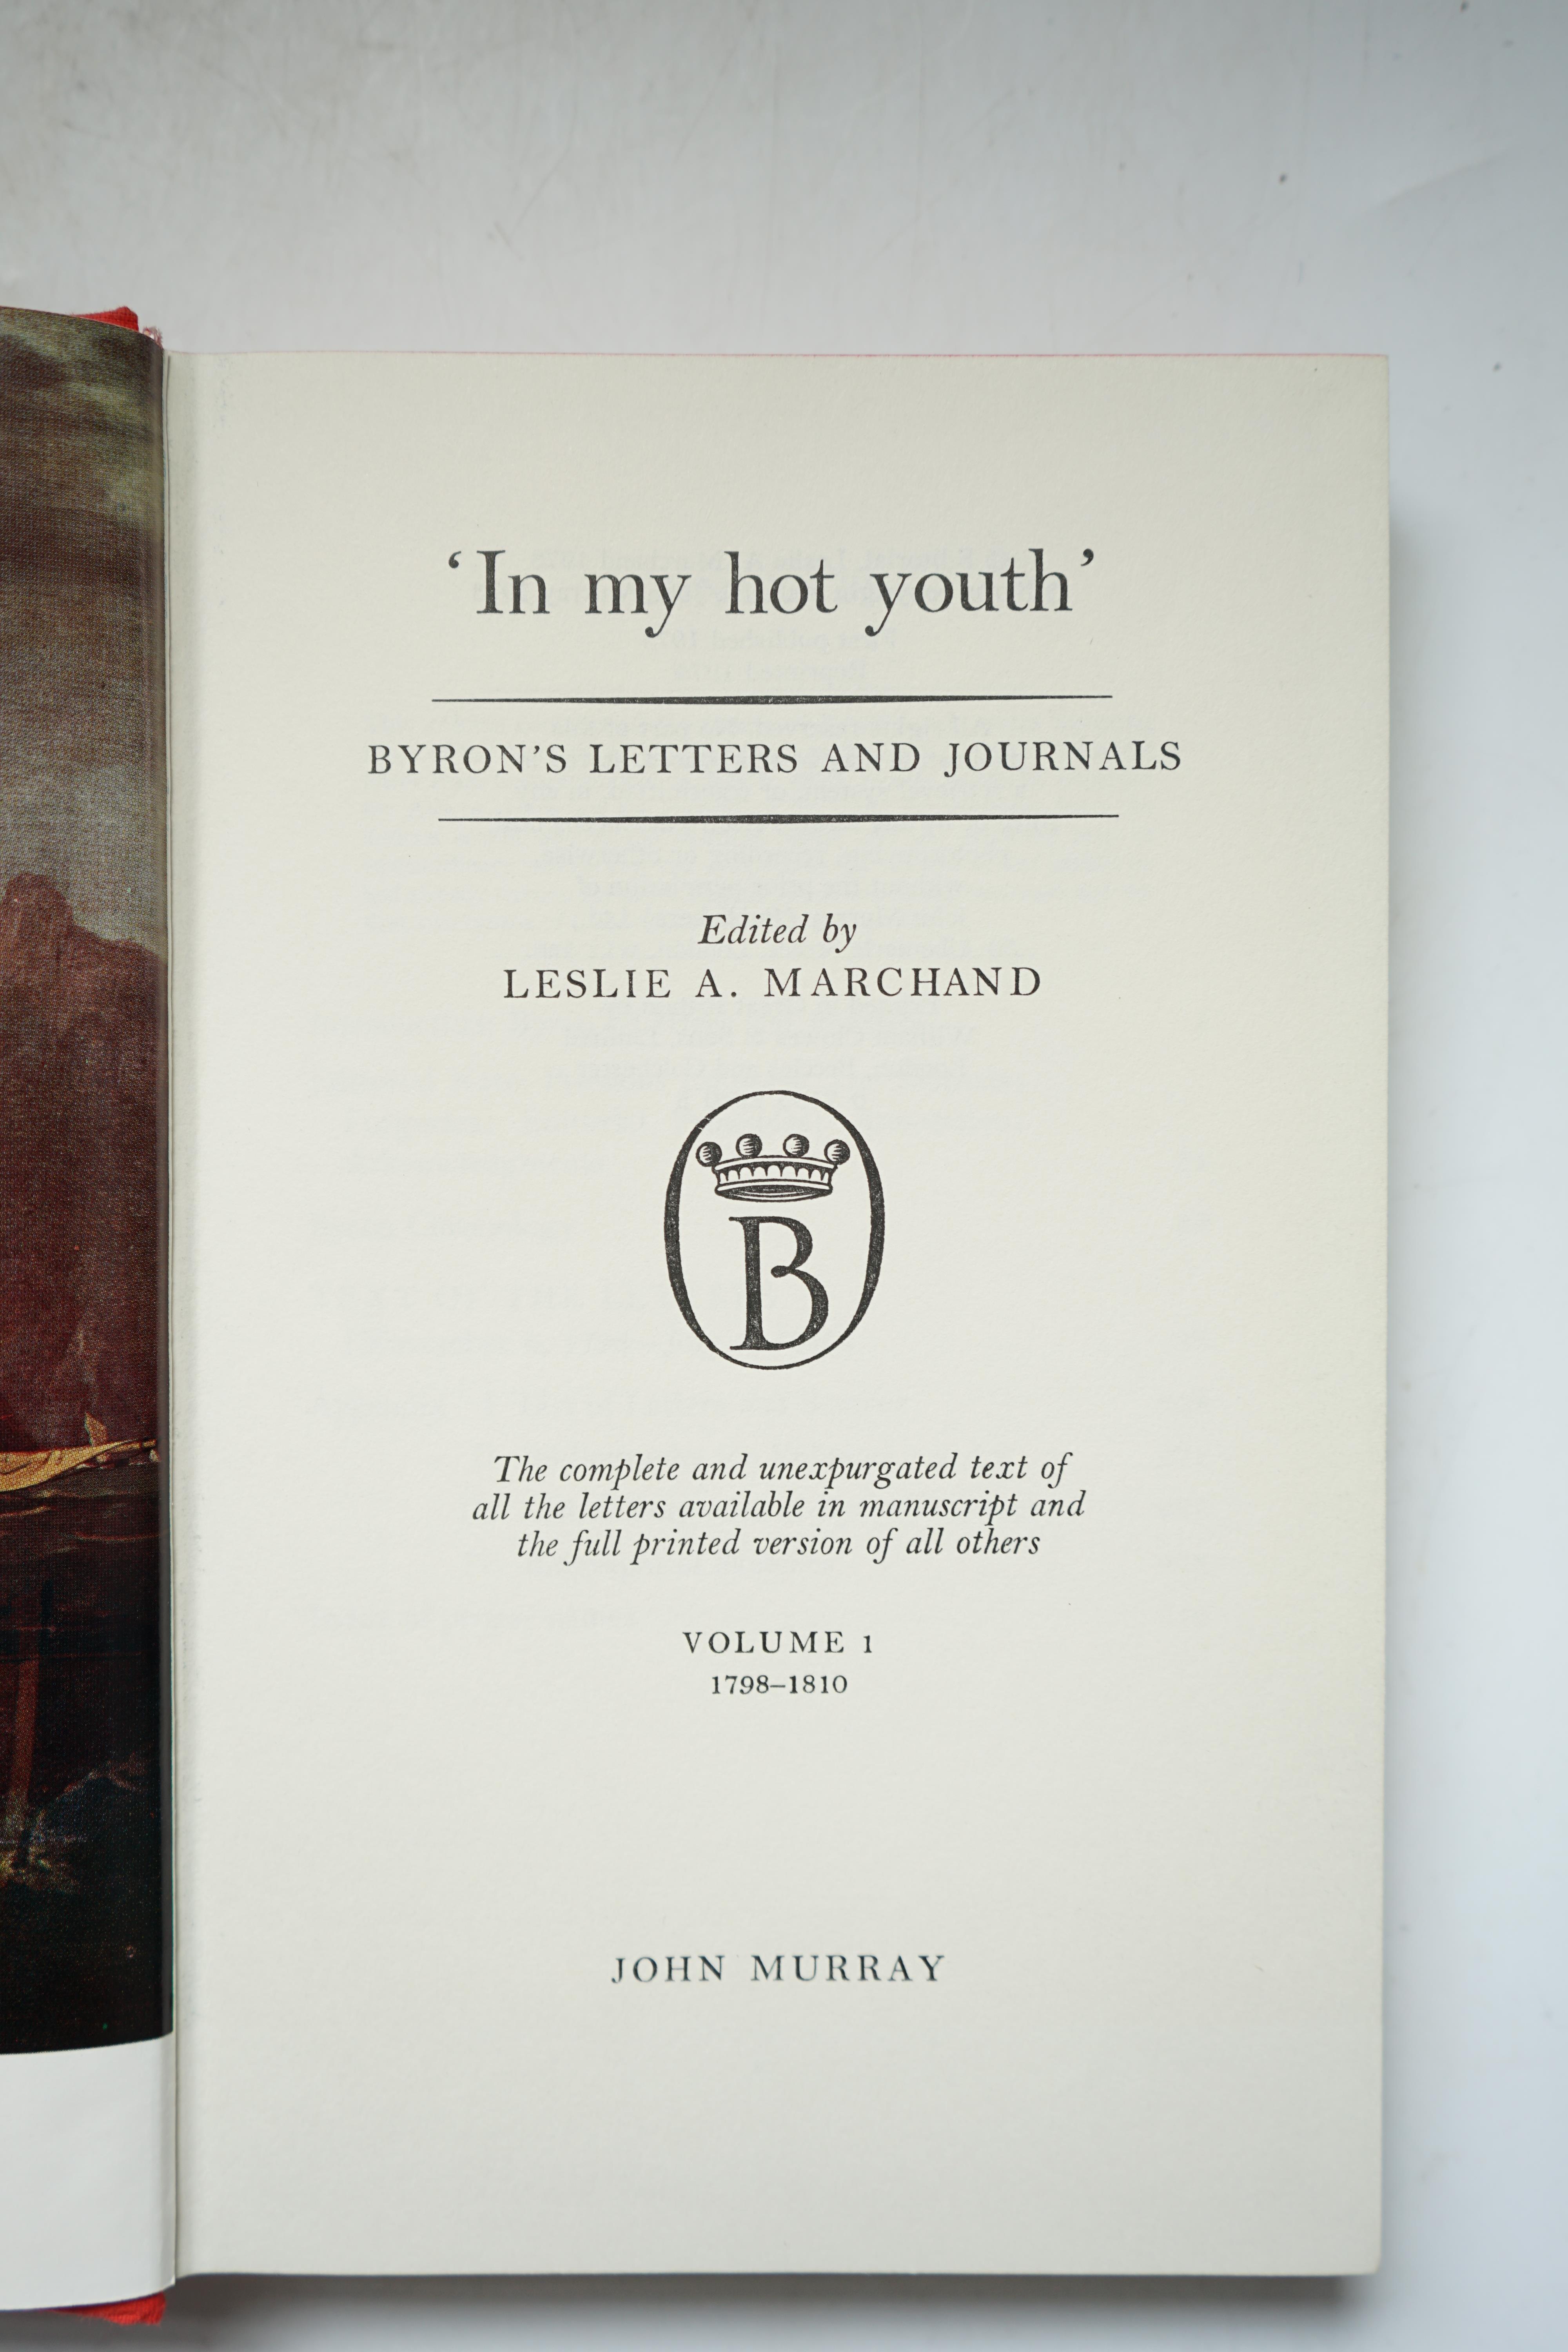 Marchant, Leslie A (editor) - Byron’s Letters and Journals, 13 vols, including general index, 8vo, original red cloth, with d/j’s, mixed editions, vol 1 with authors presentation inscription, John Murray, London, 1974-82